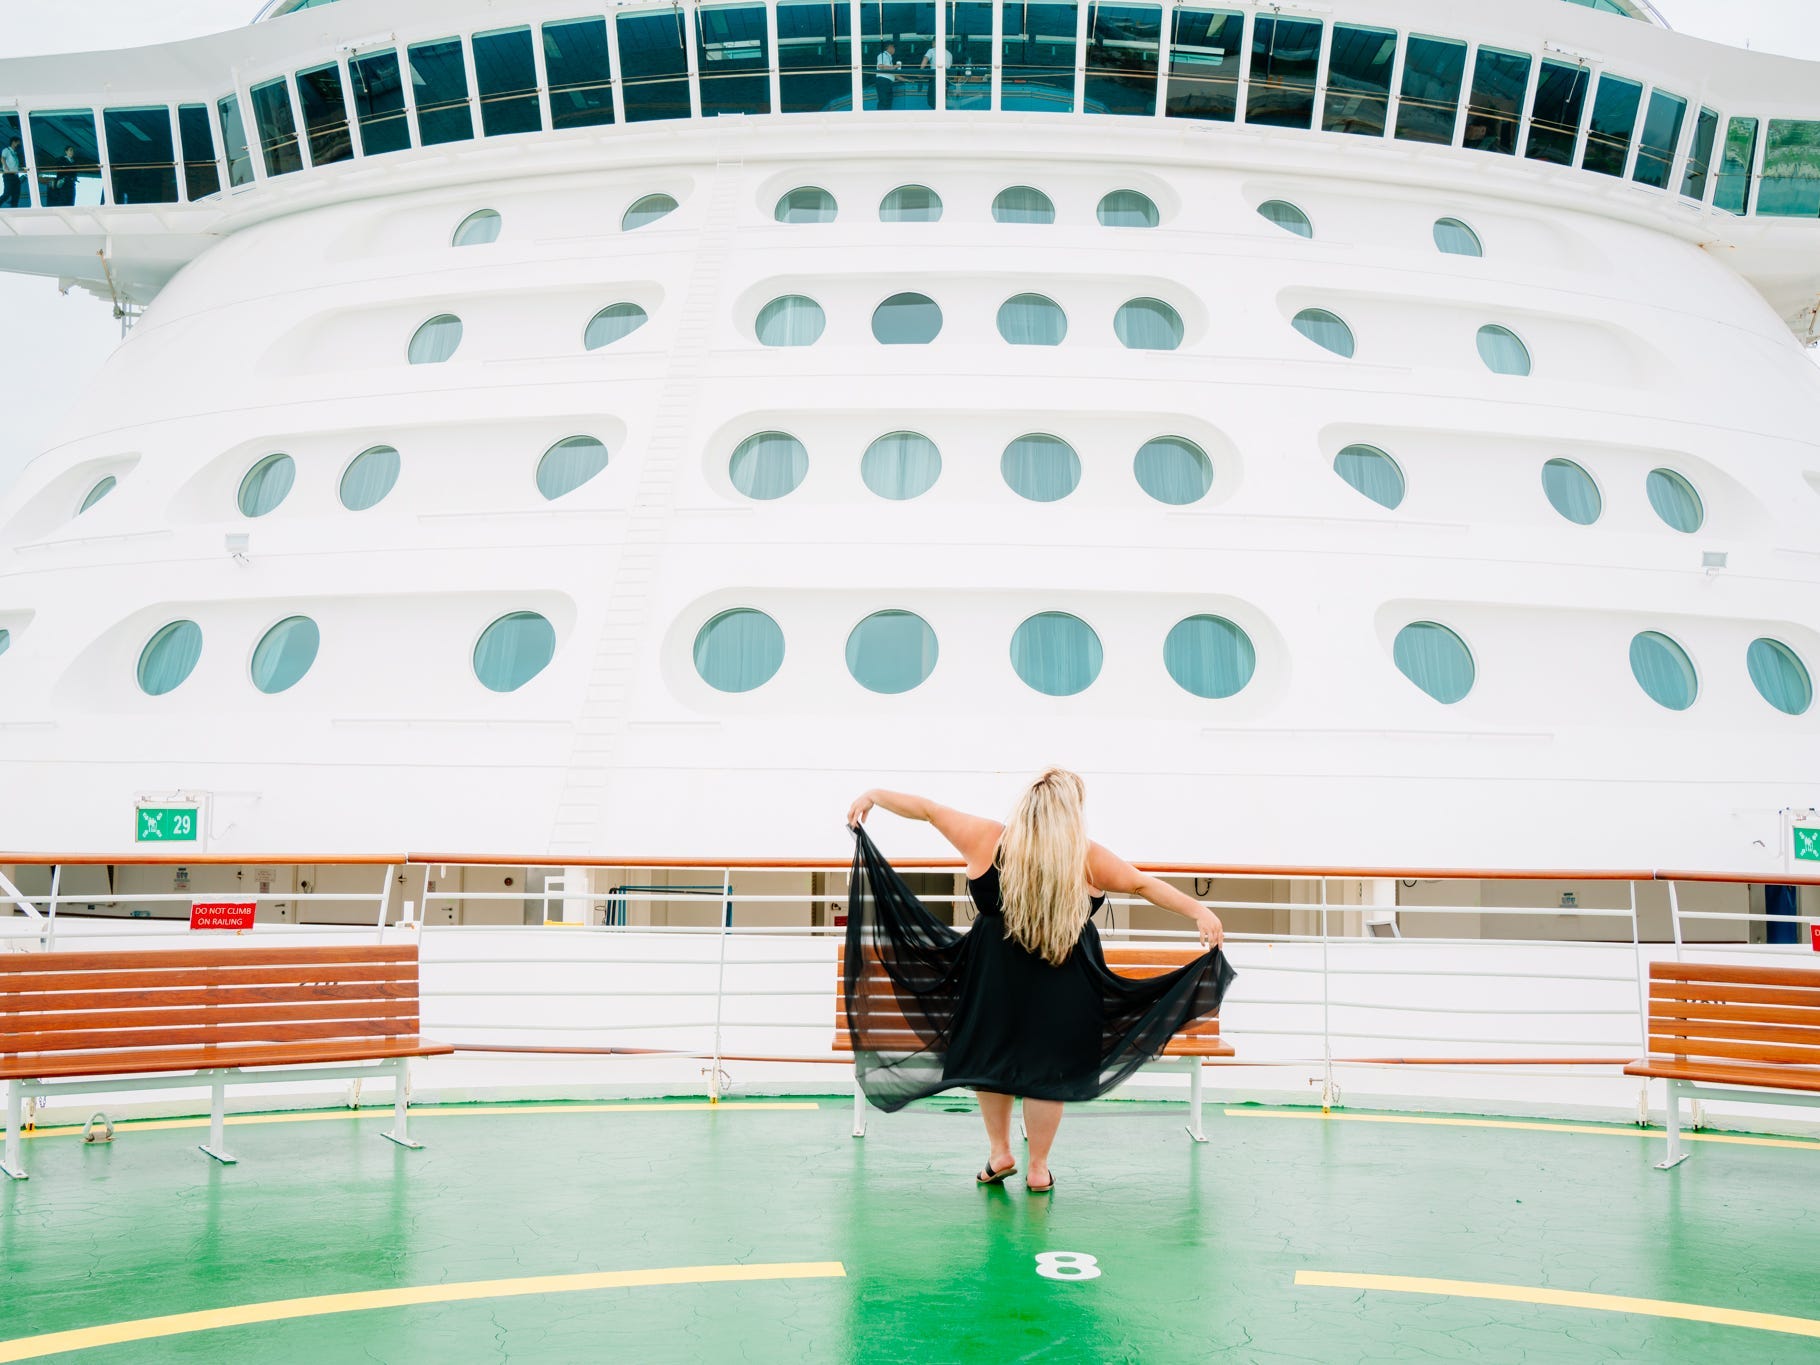 A woman standing on the deck of a cruise ship with her back to the camera